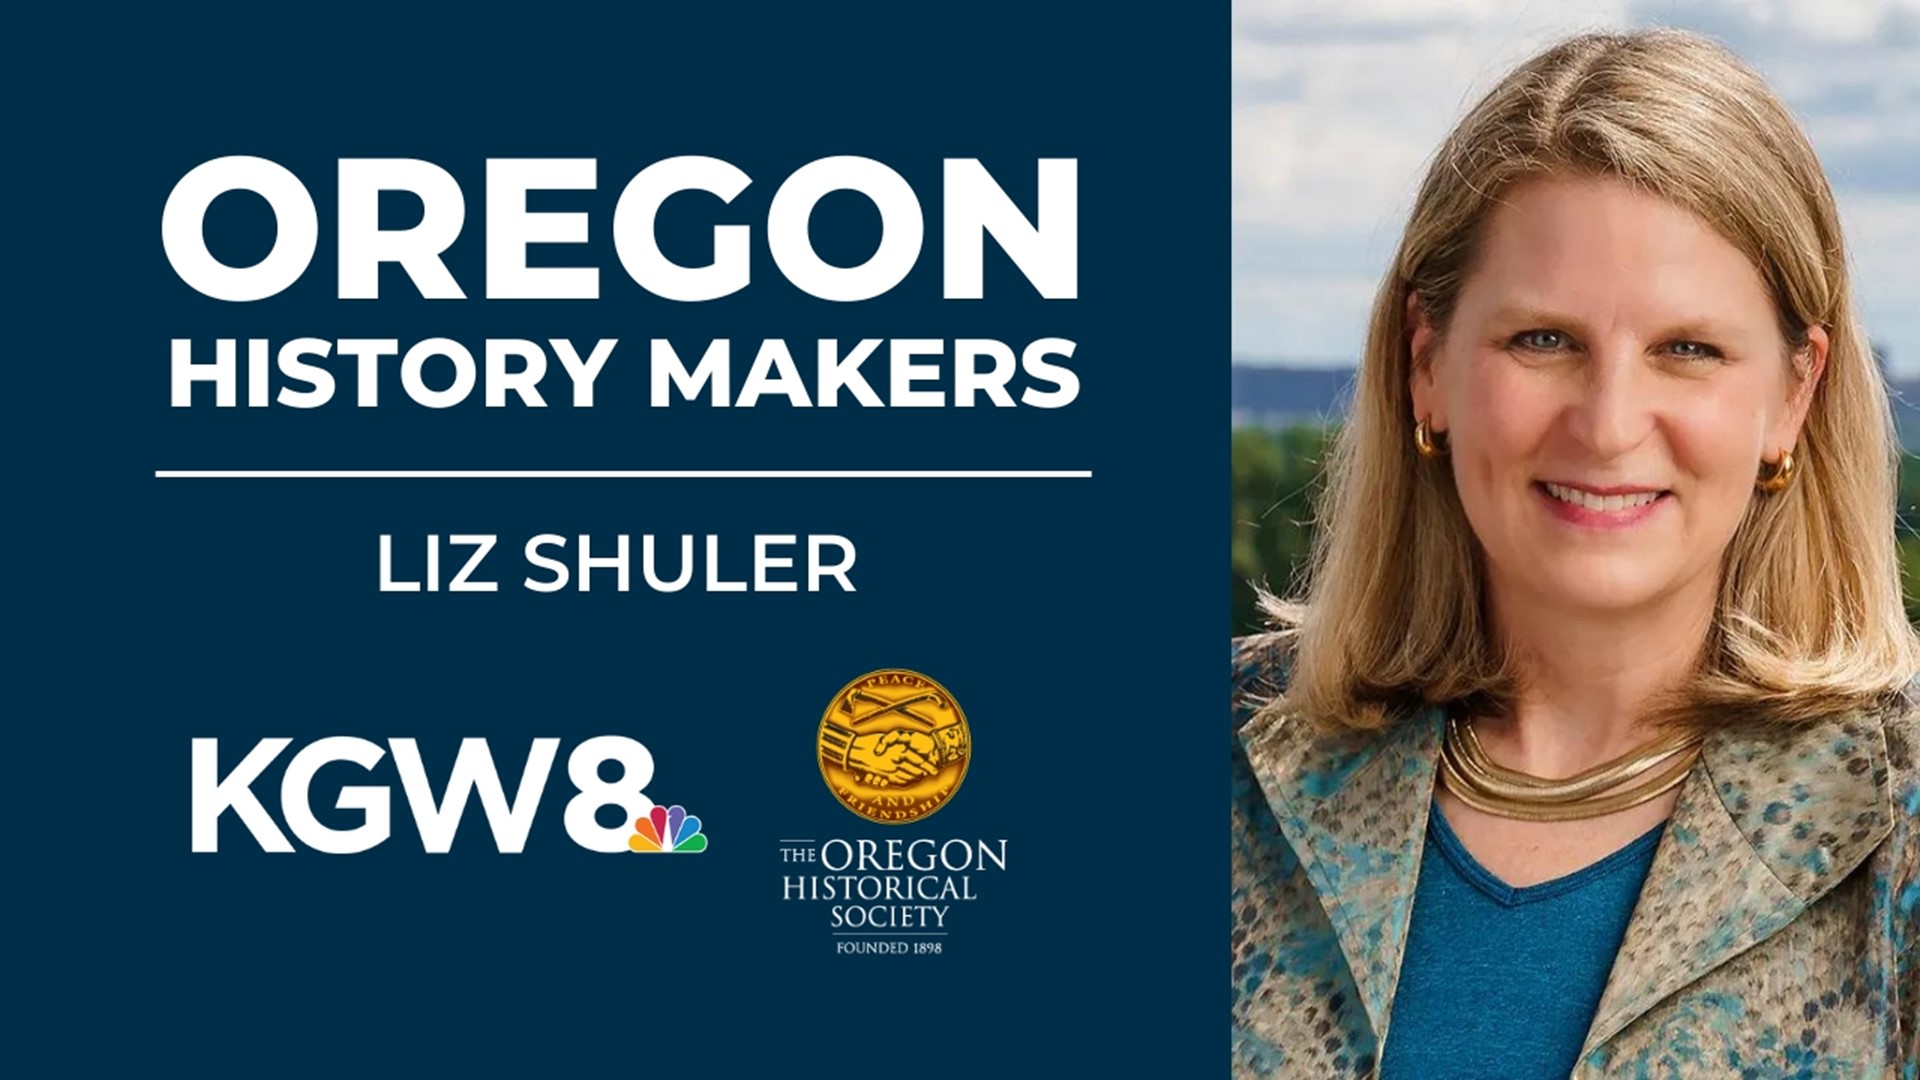 Liz Shuler made history in 2021 when she was elected as the first woman president of the AFL-CIO, a federation of 56 unions with 12.5 million members.